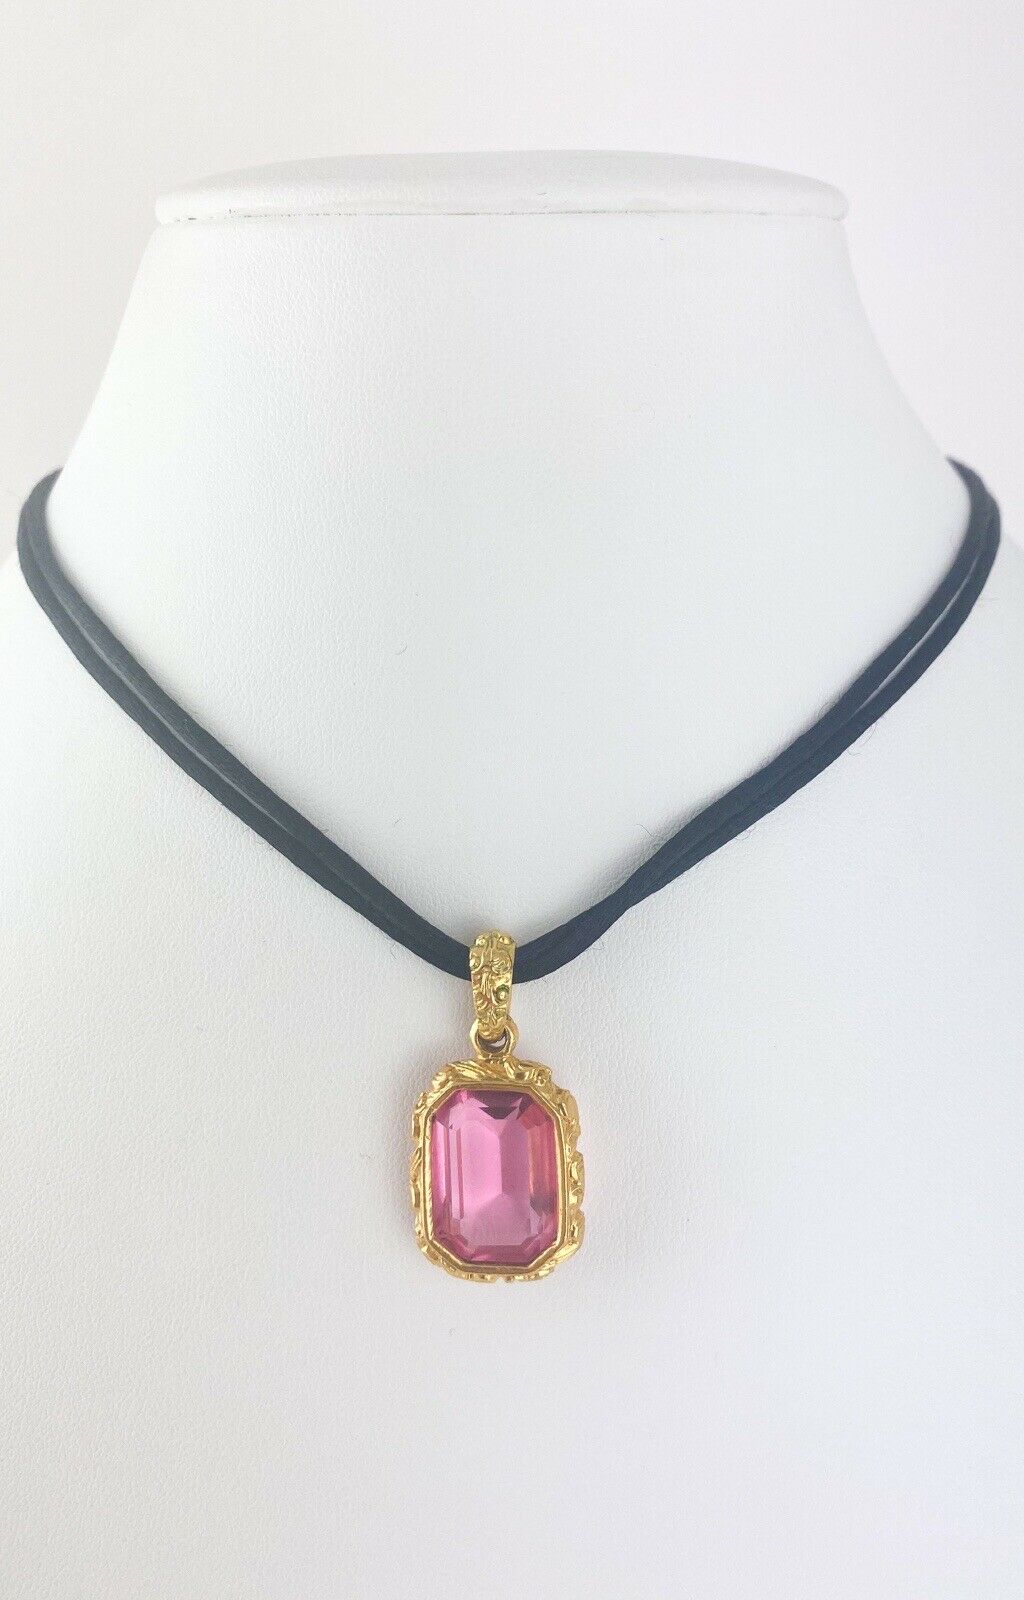 【SOLD OUT】YSL Yves Saint Laurent Vintage Gold Tone Necklace Pink Beautiful  Condition –Excellent Vintage Condition